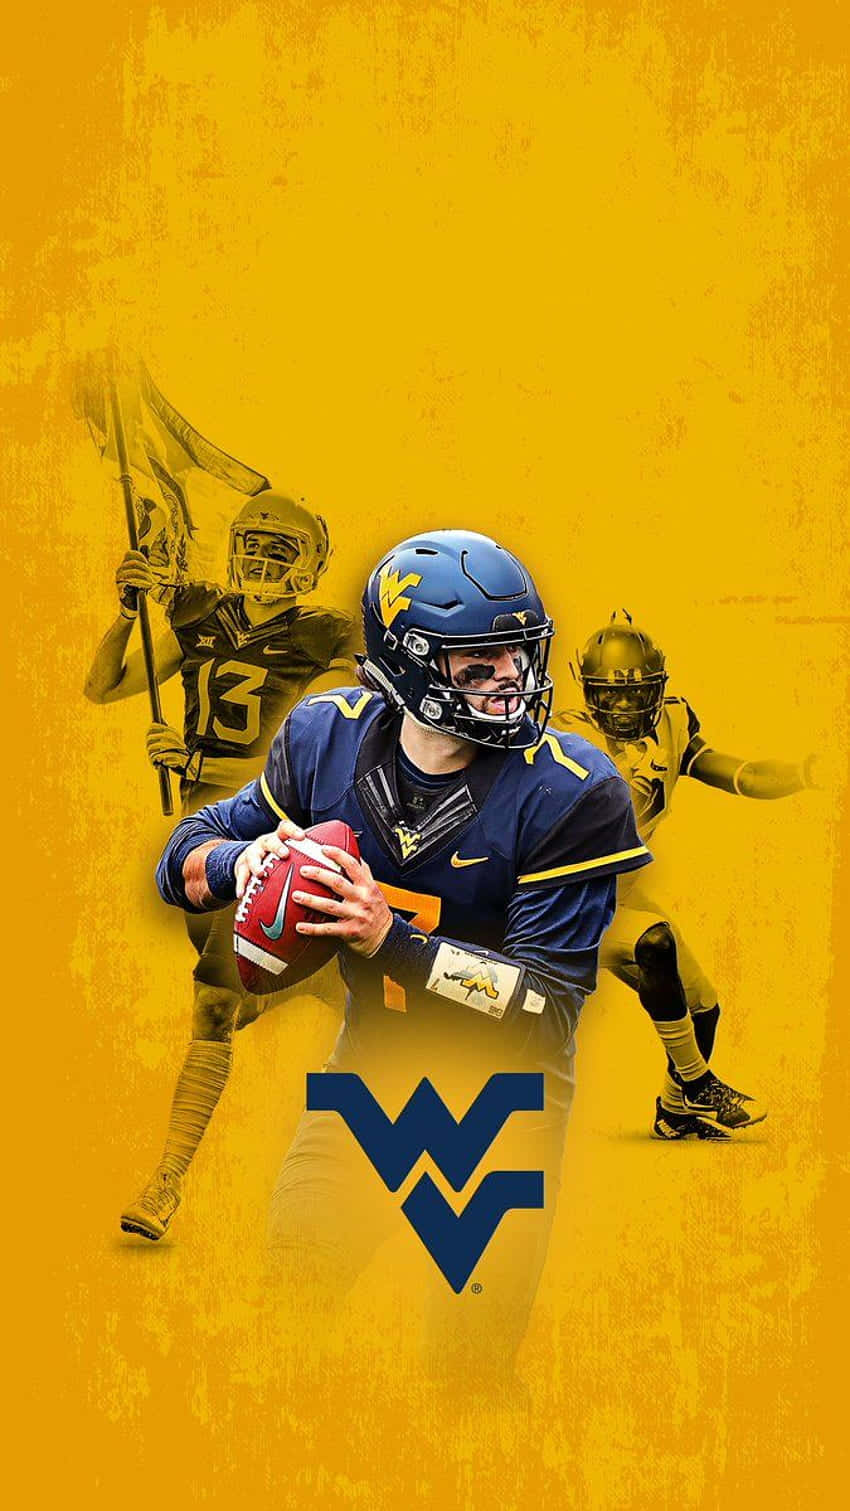 Mountaineers Roar With Wvu Pride